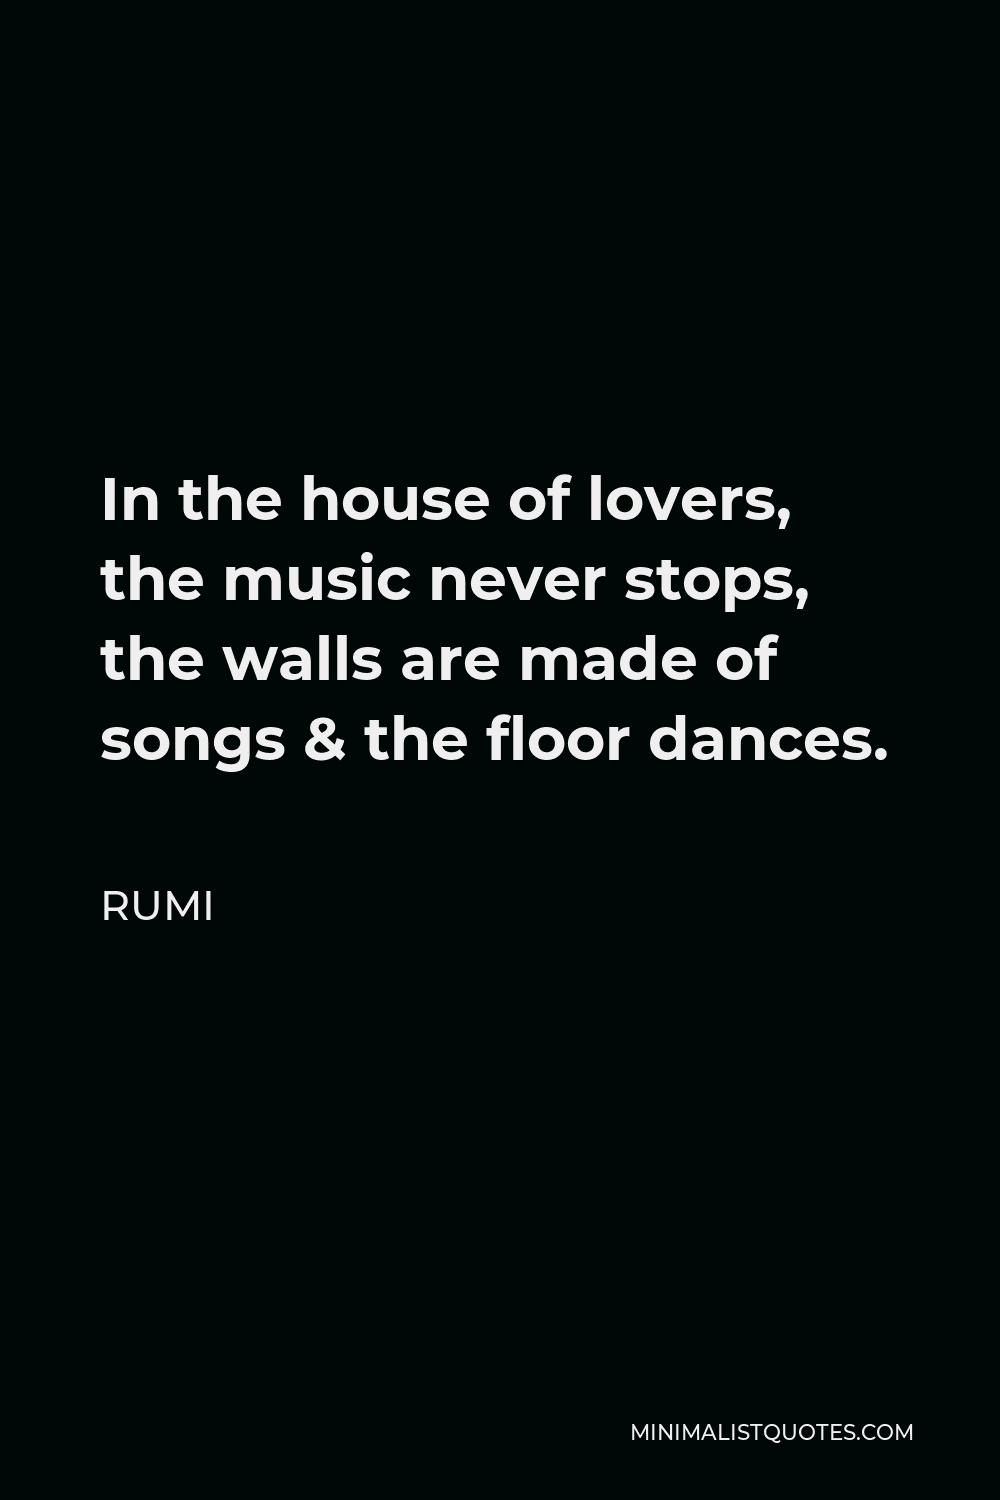 Rumi Quote - In the house of lovers, the music never stops, the walls are made of songs & the floor dances.